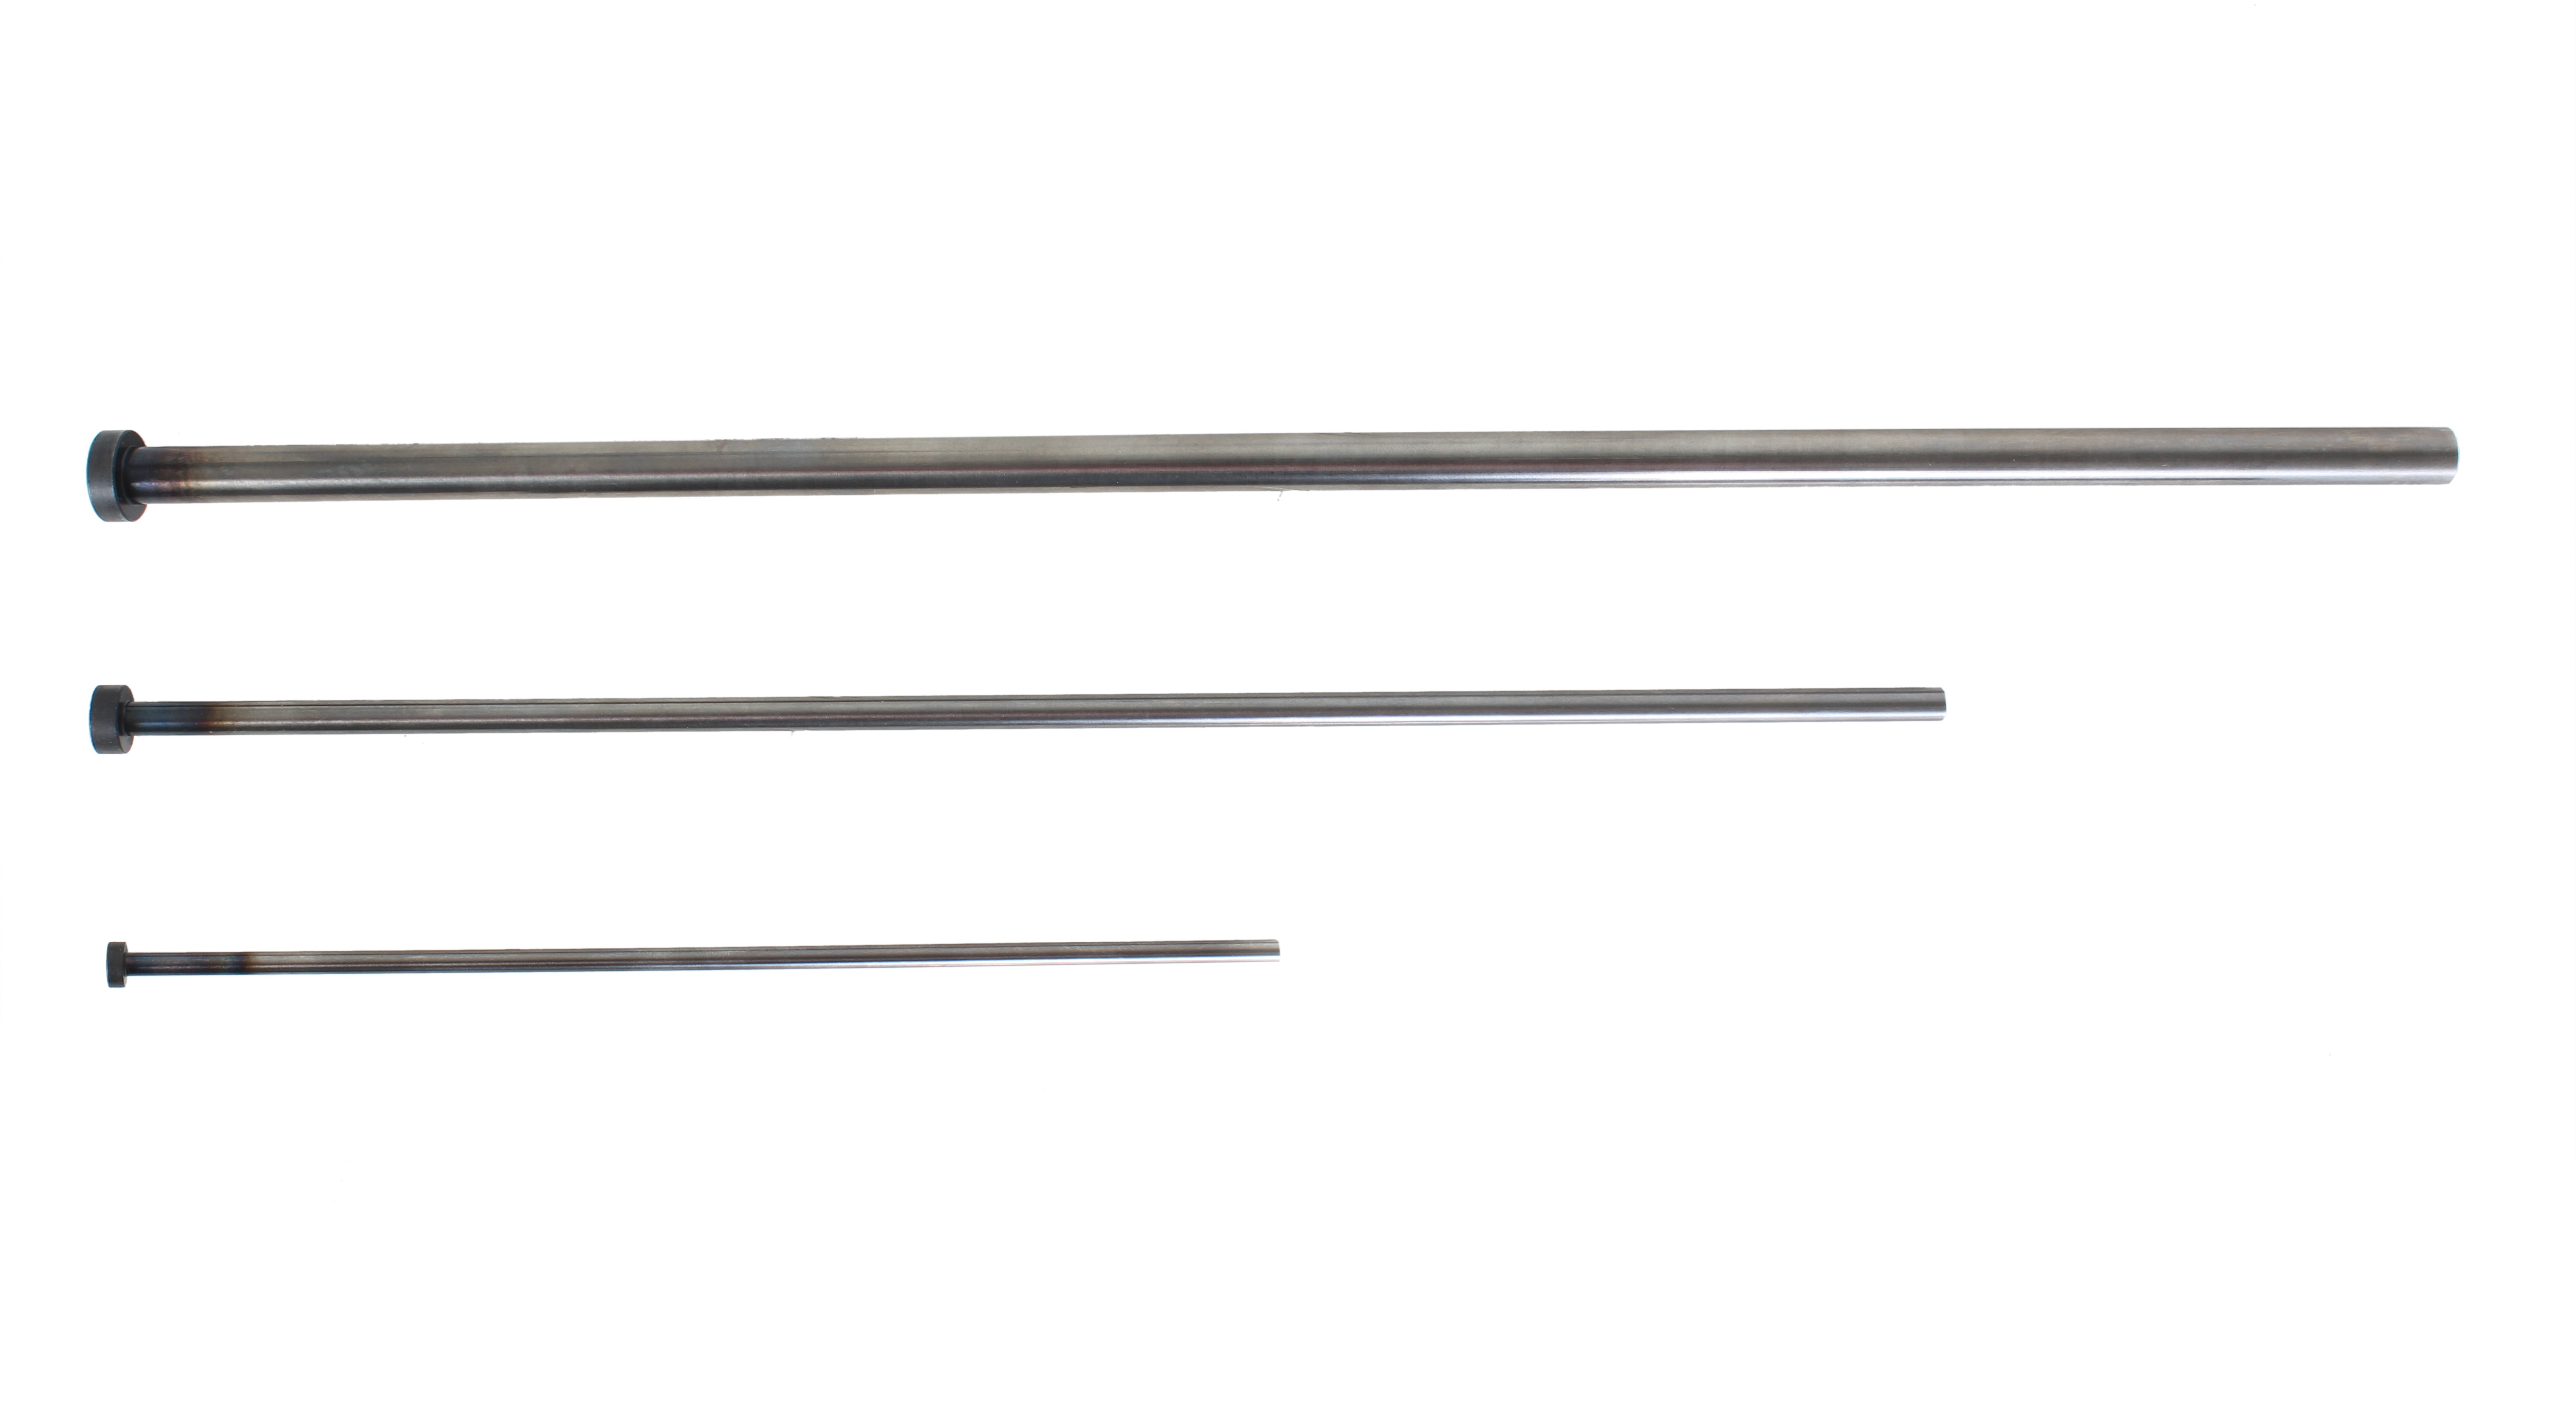 STRAIGHT EJECTOR PINS -DIN Type/SKD61 equivalent+Nitrided/Standard- (D-EPN8-250) 